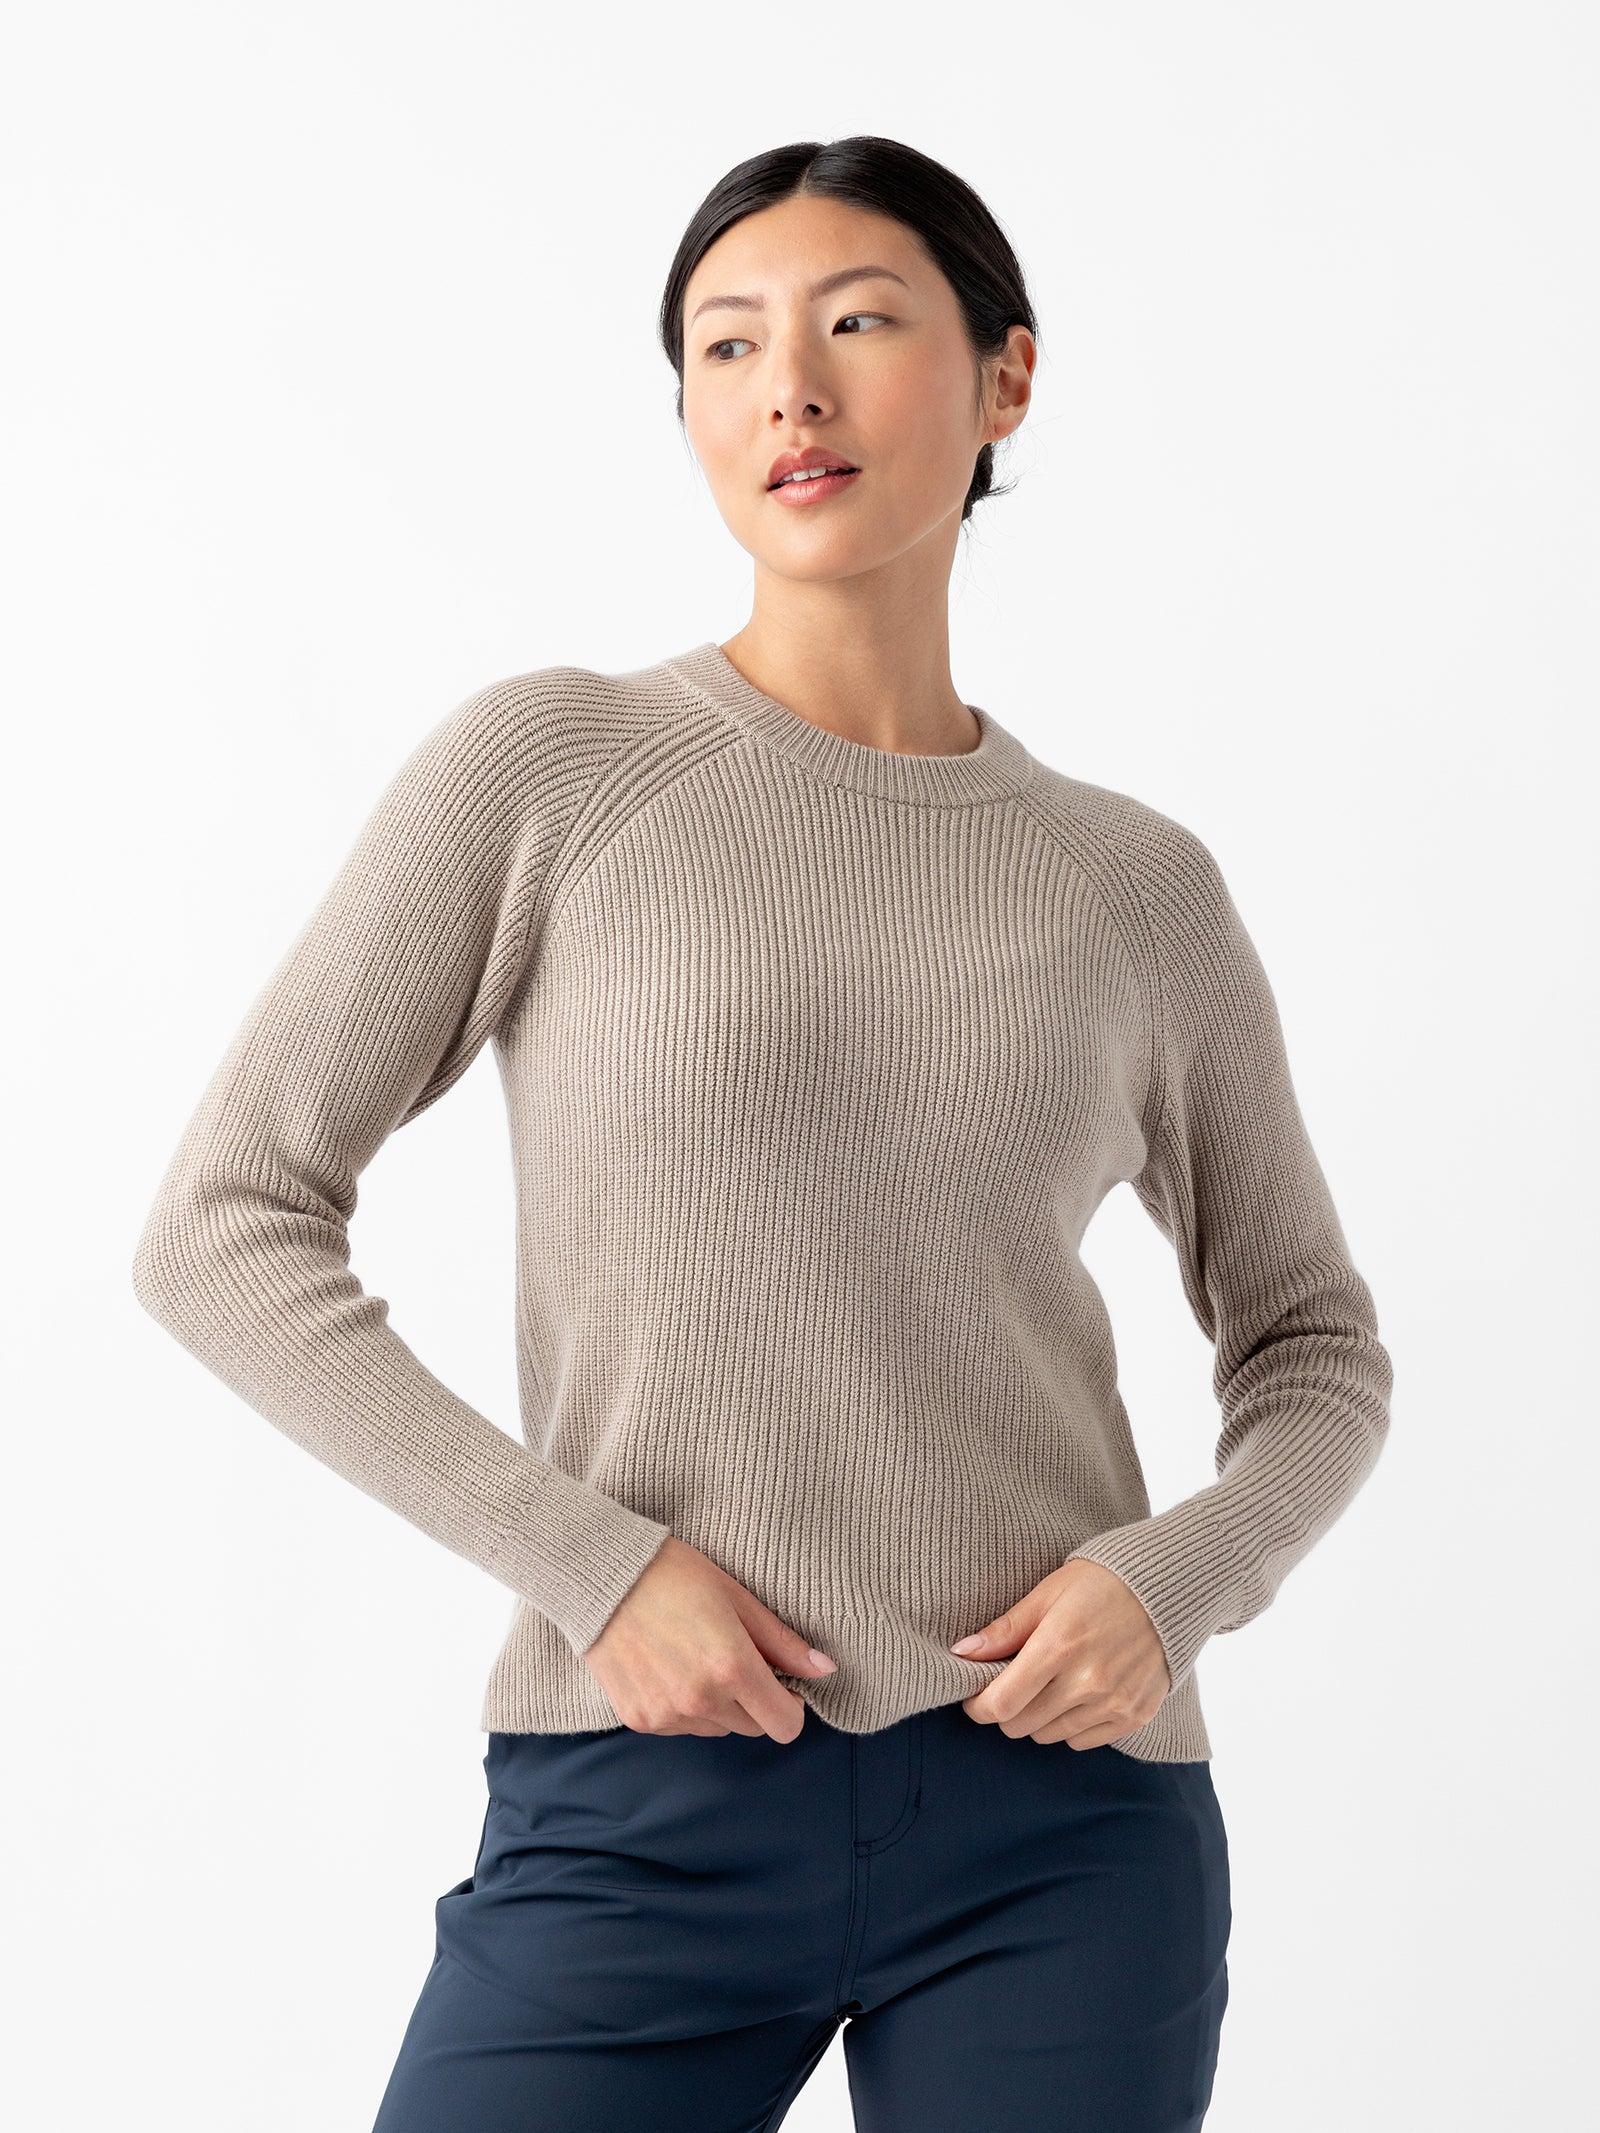 A person stands against a plain white background, wearing Cozy Earth's Women's Classic Crewneck in beige and dark blue pants. The individual has dark hair tied back and is looking to the side with hands resting on the hips. 